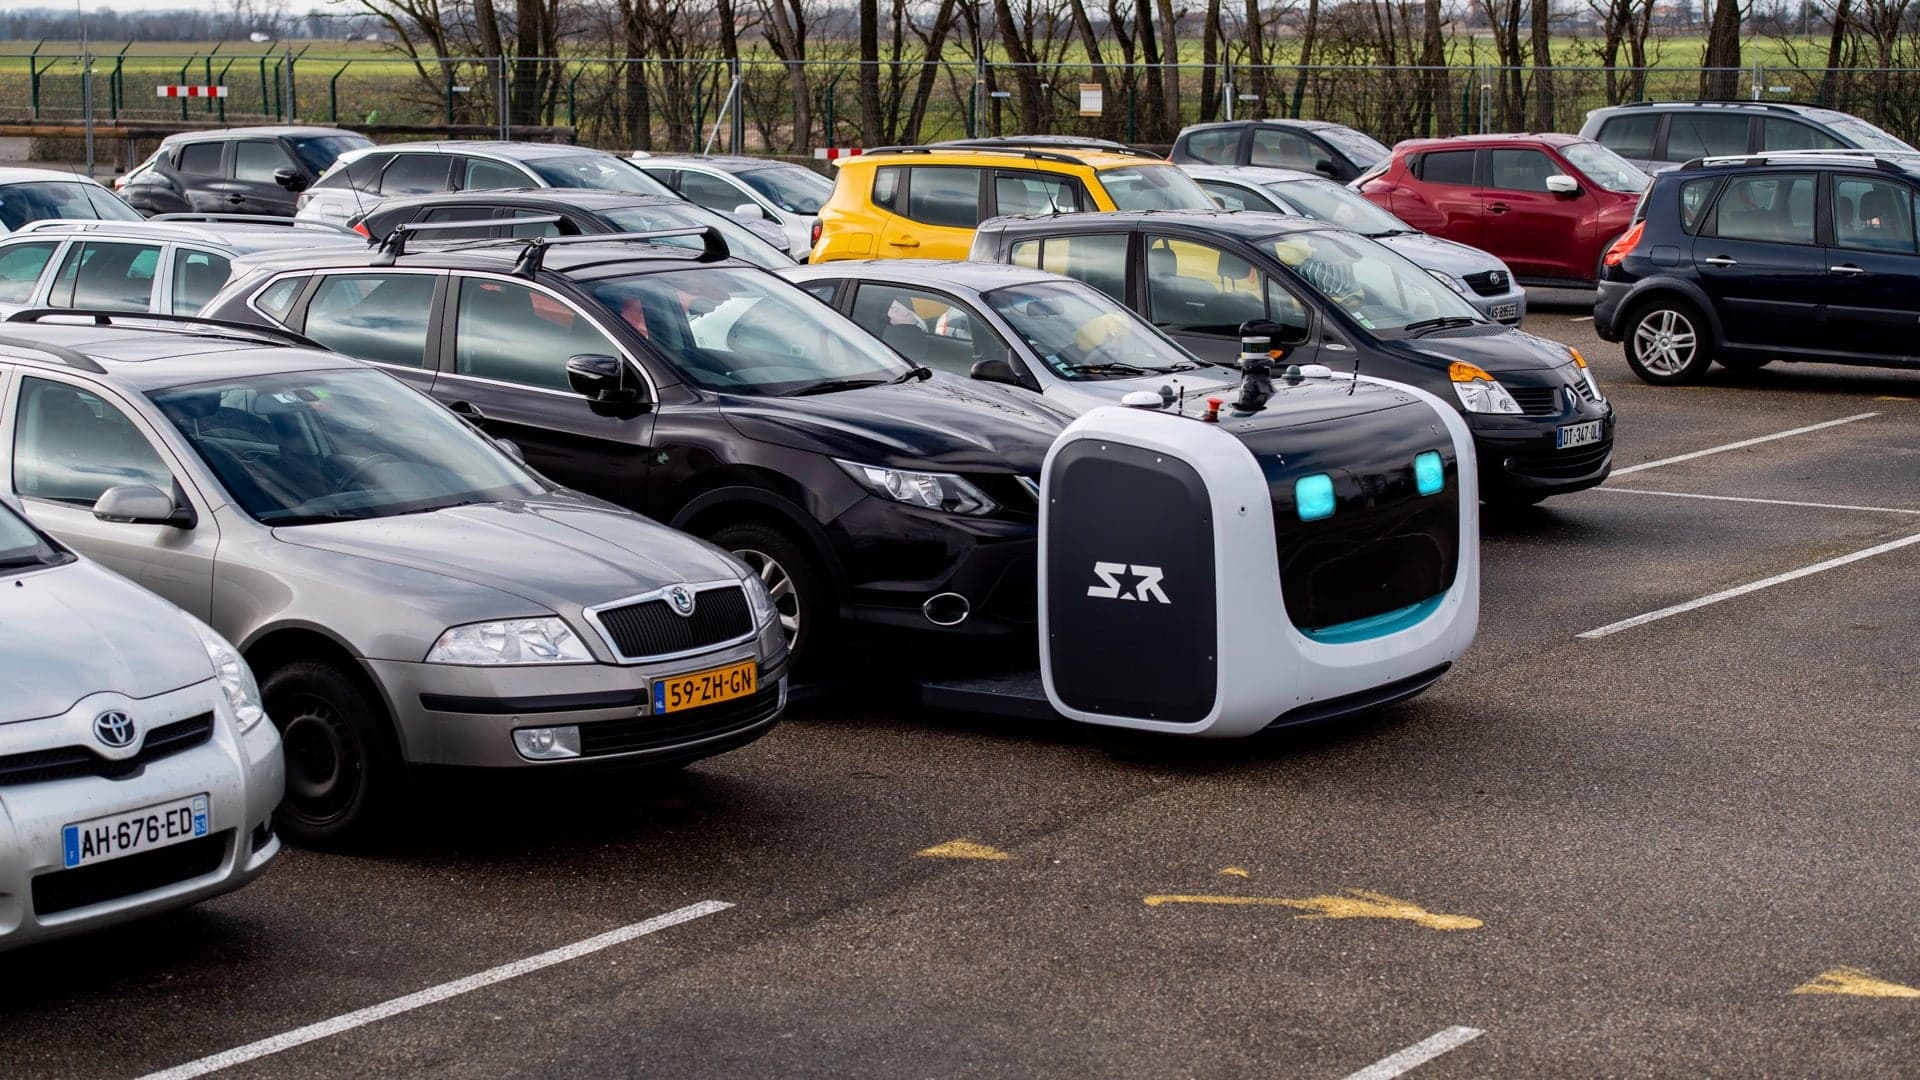 A French Airport Is Using Car-Parking Robots to Save Travelers Precious Time